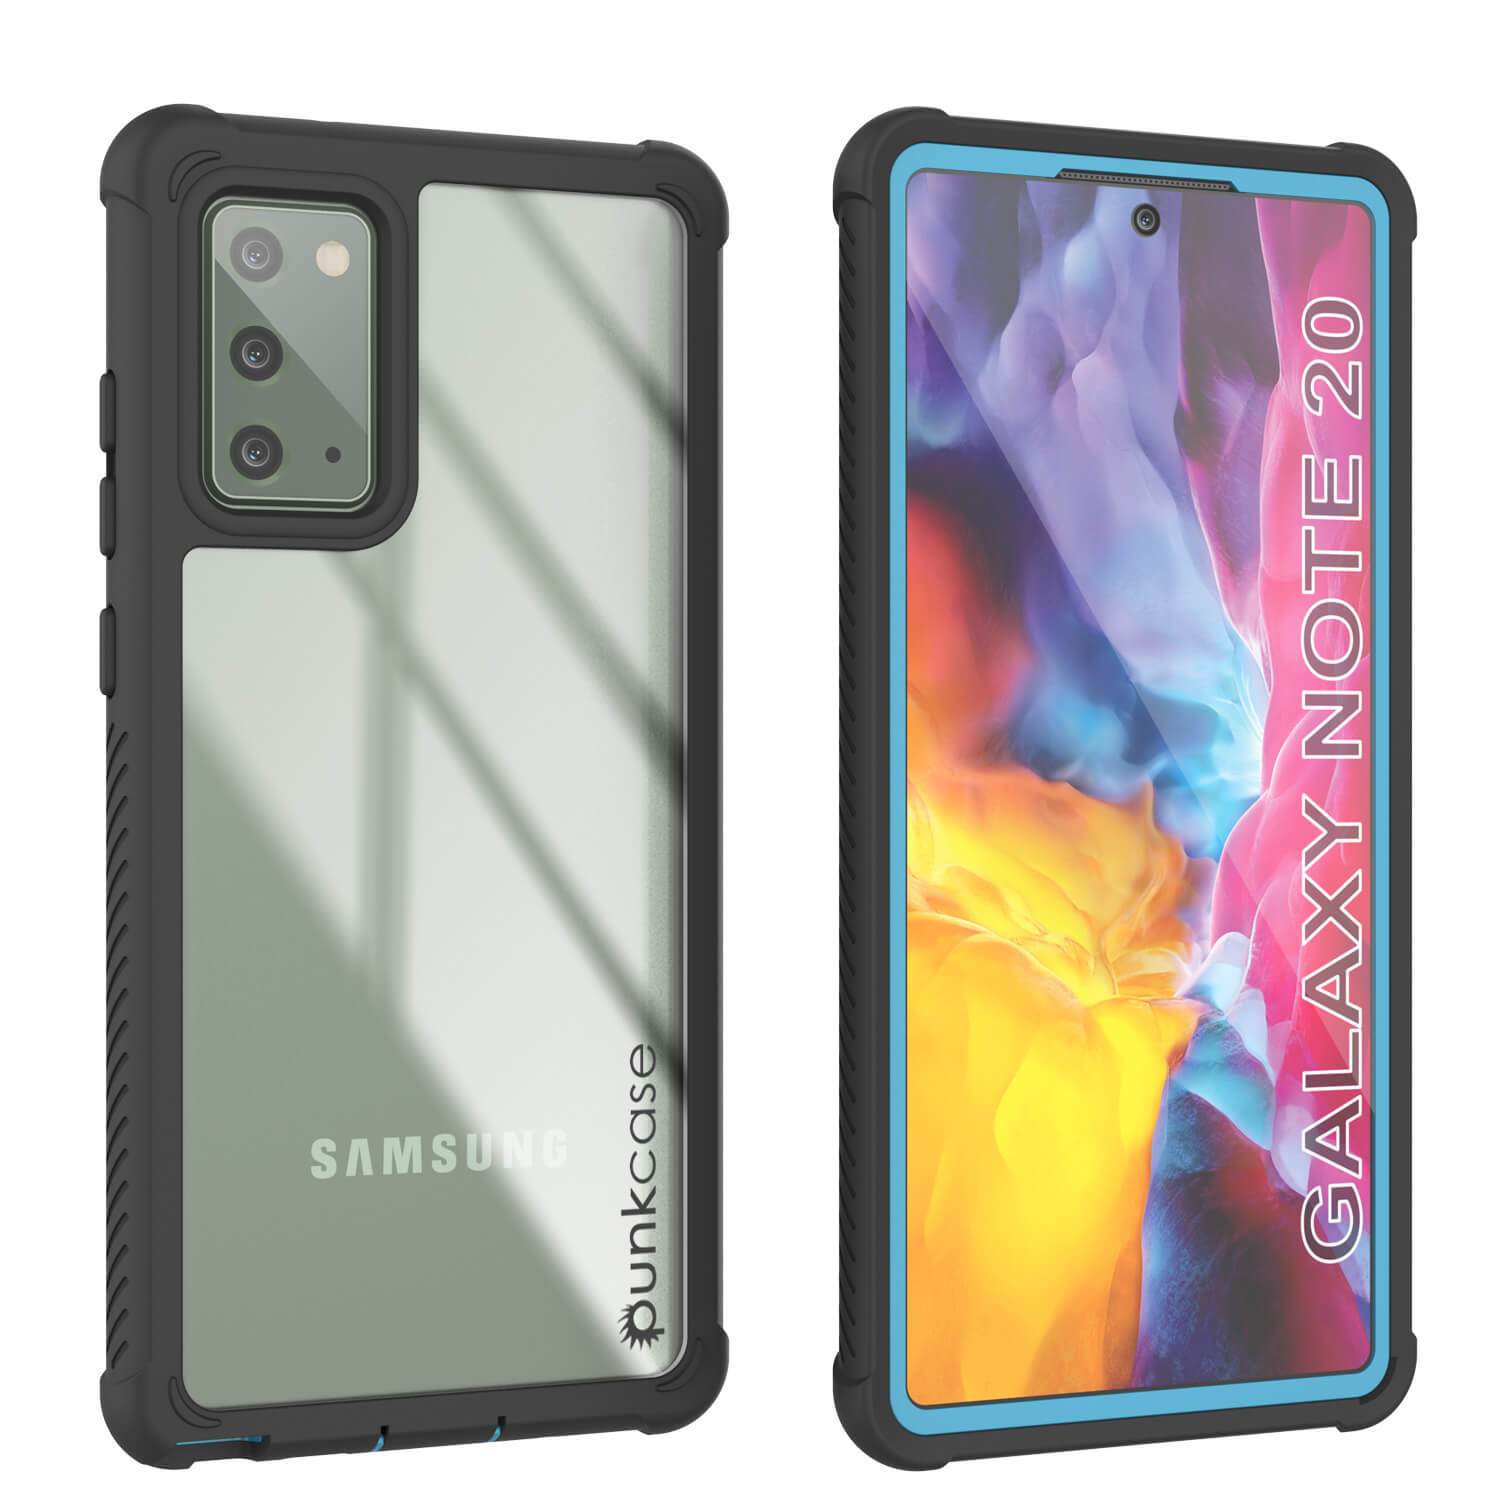 Punkcase Galaxy Note 20 Case, [Spartan Series] Light Blue Rugged Heavy Duty Cover W/Built in Screen Protector (Color in image: Light Blue)